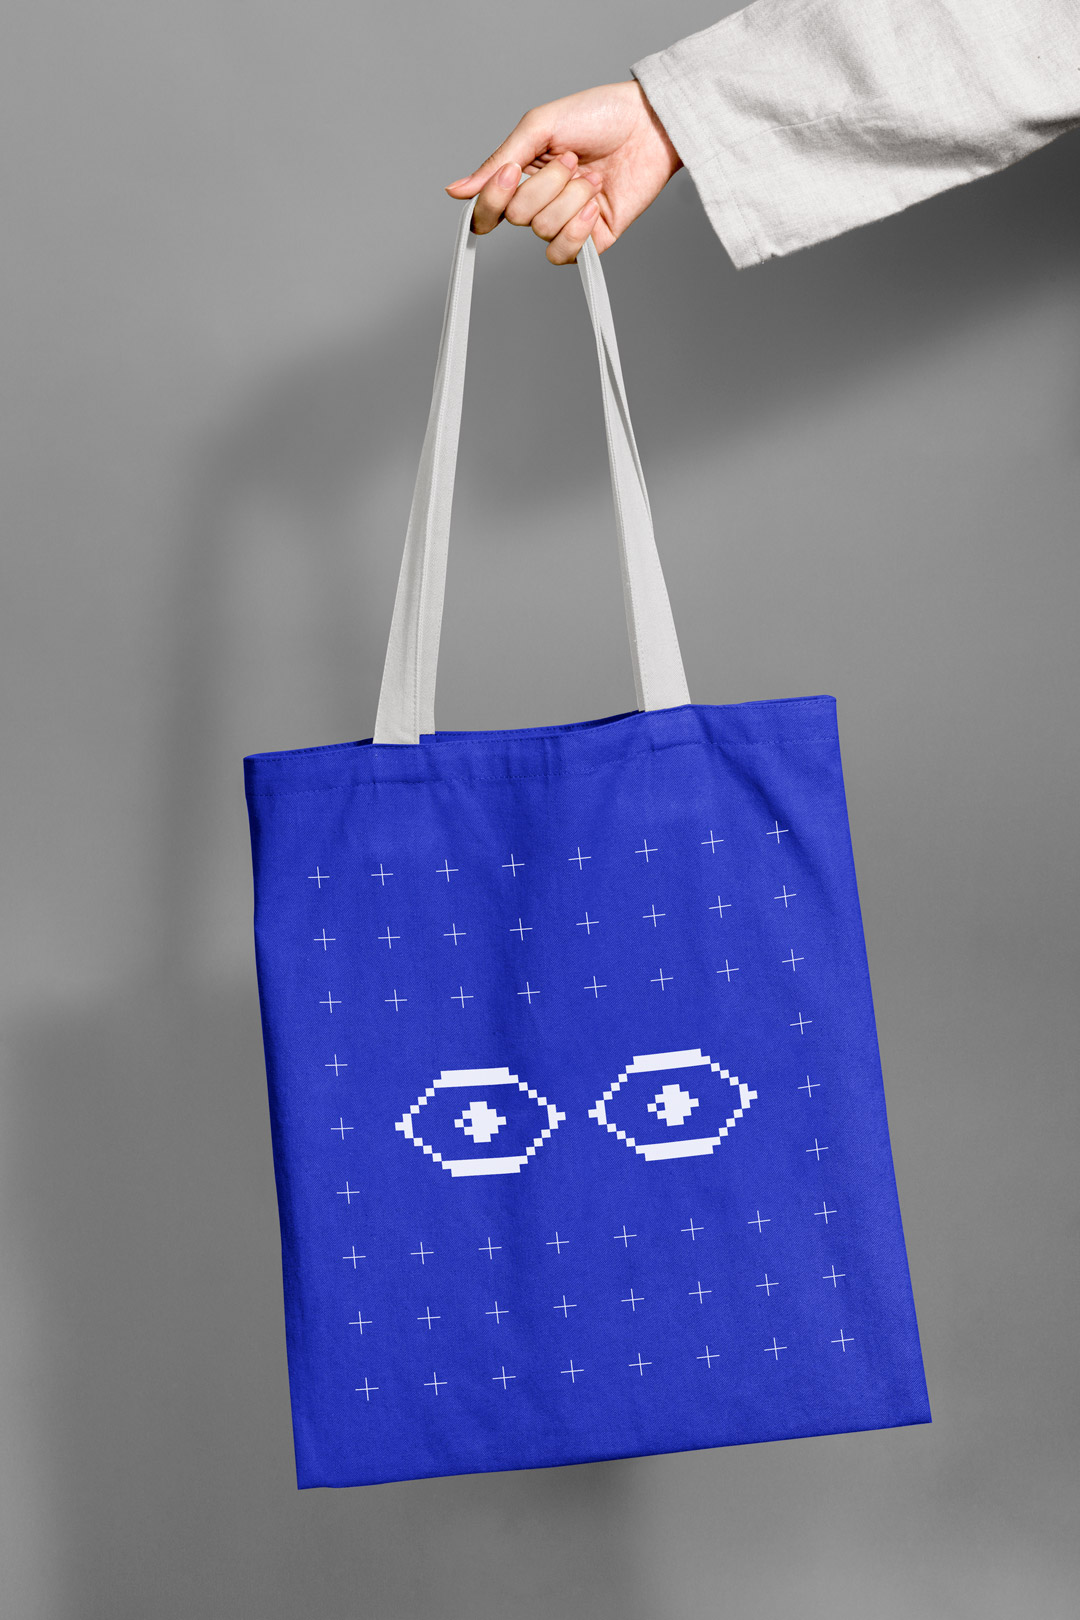 Tote bag with festival graphics.